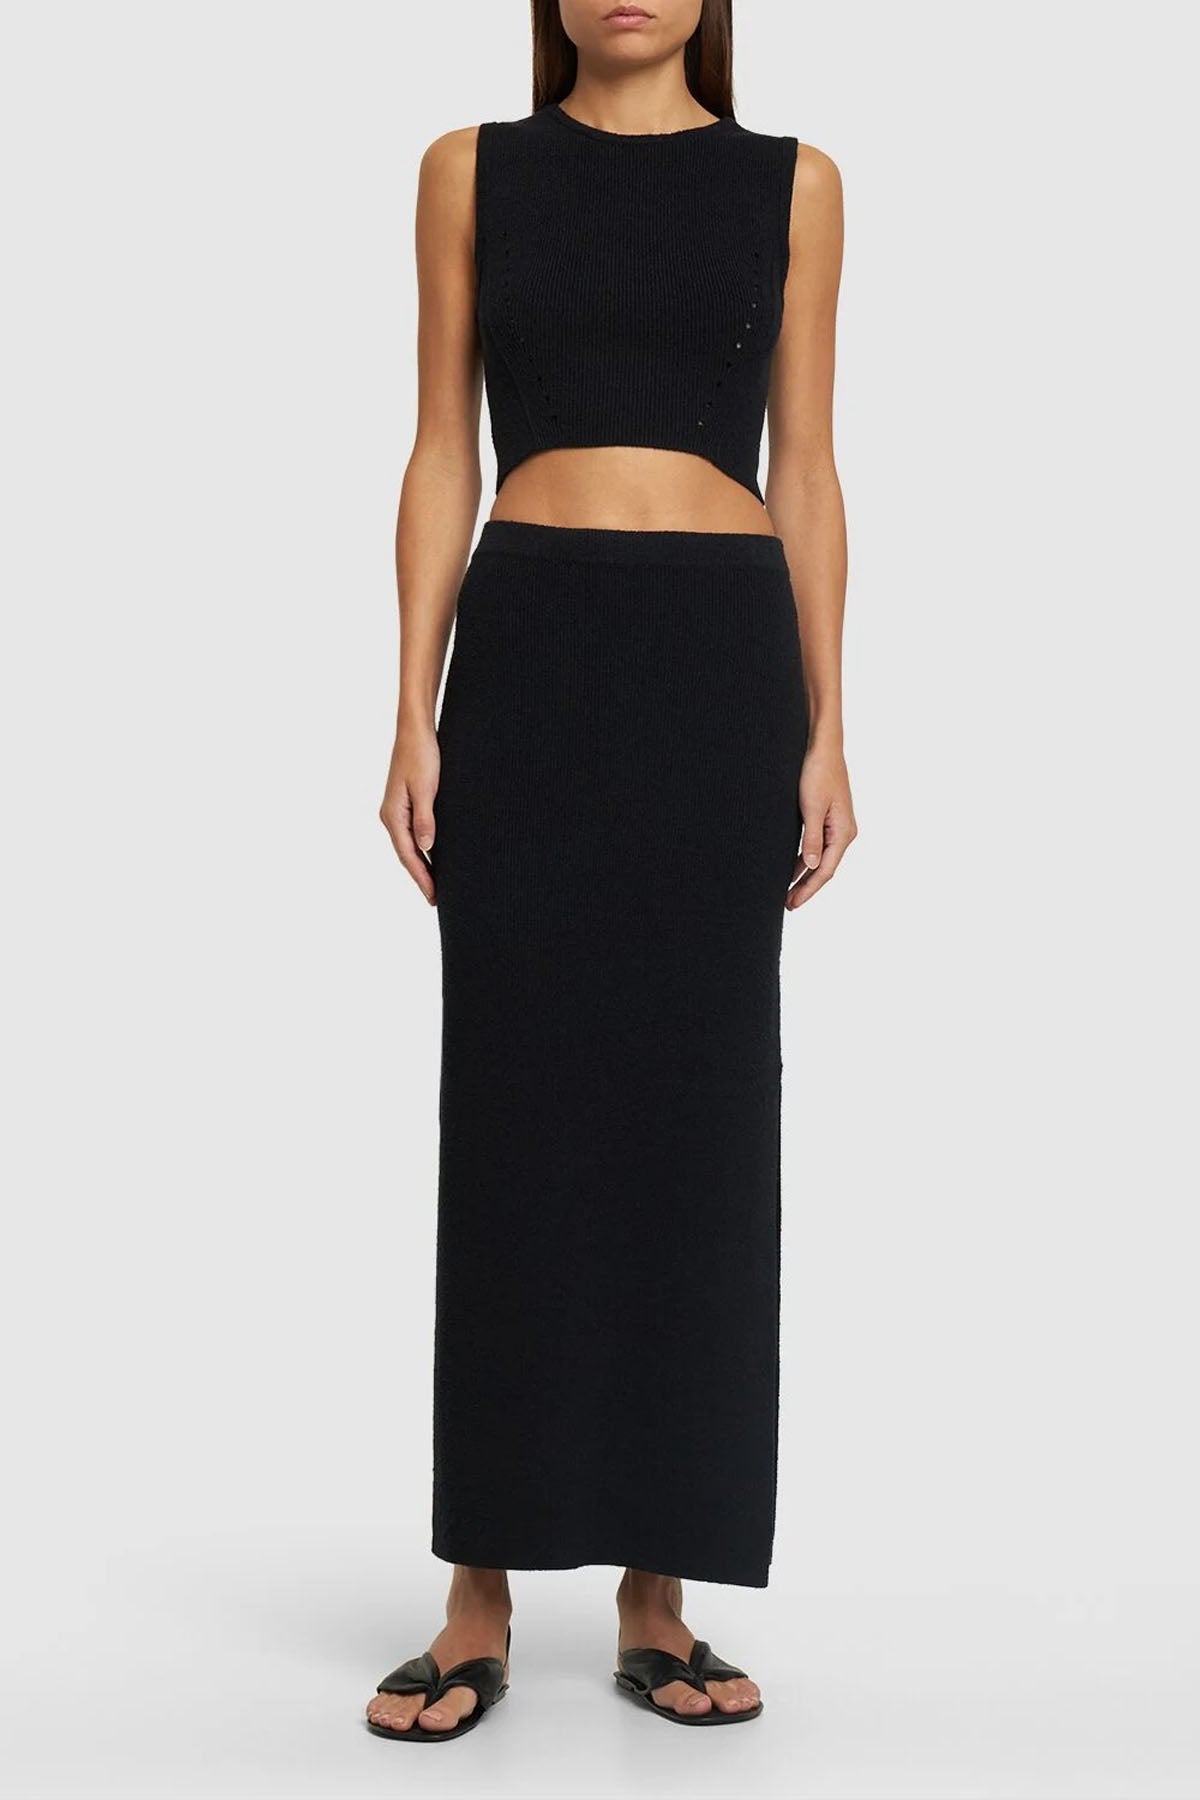 Loulou Studio Chace Cropped Top